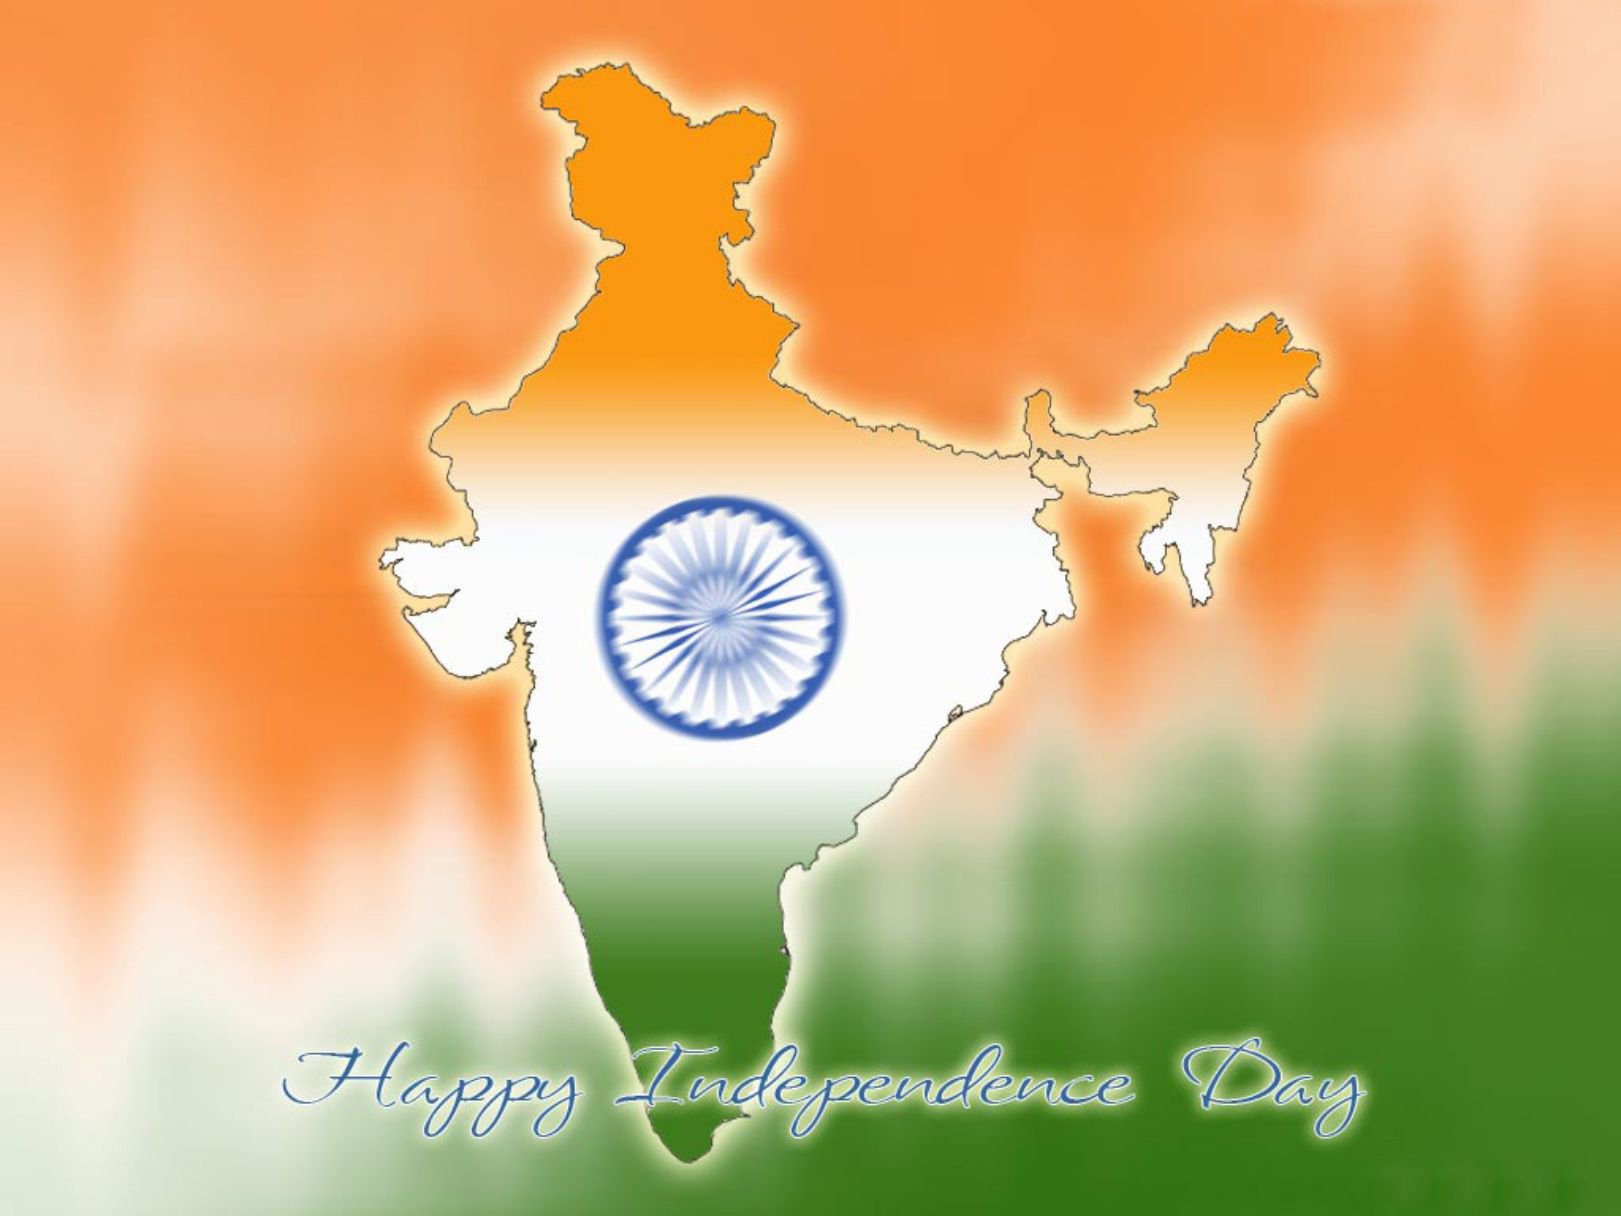 Beautiful Indian Map 15 August Independence Day Images   15 August